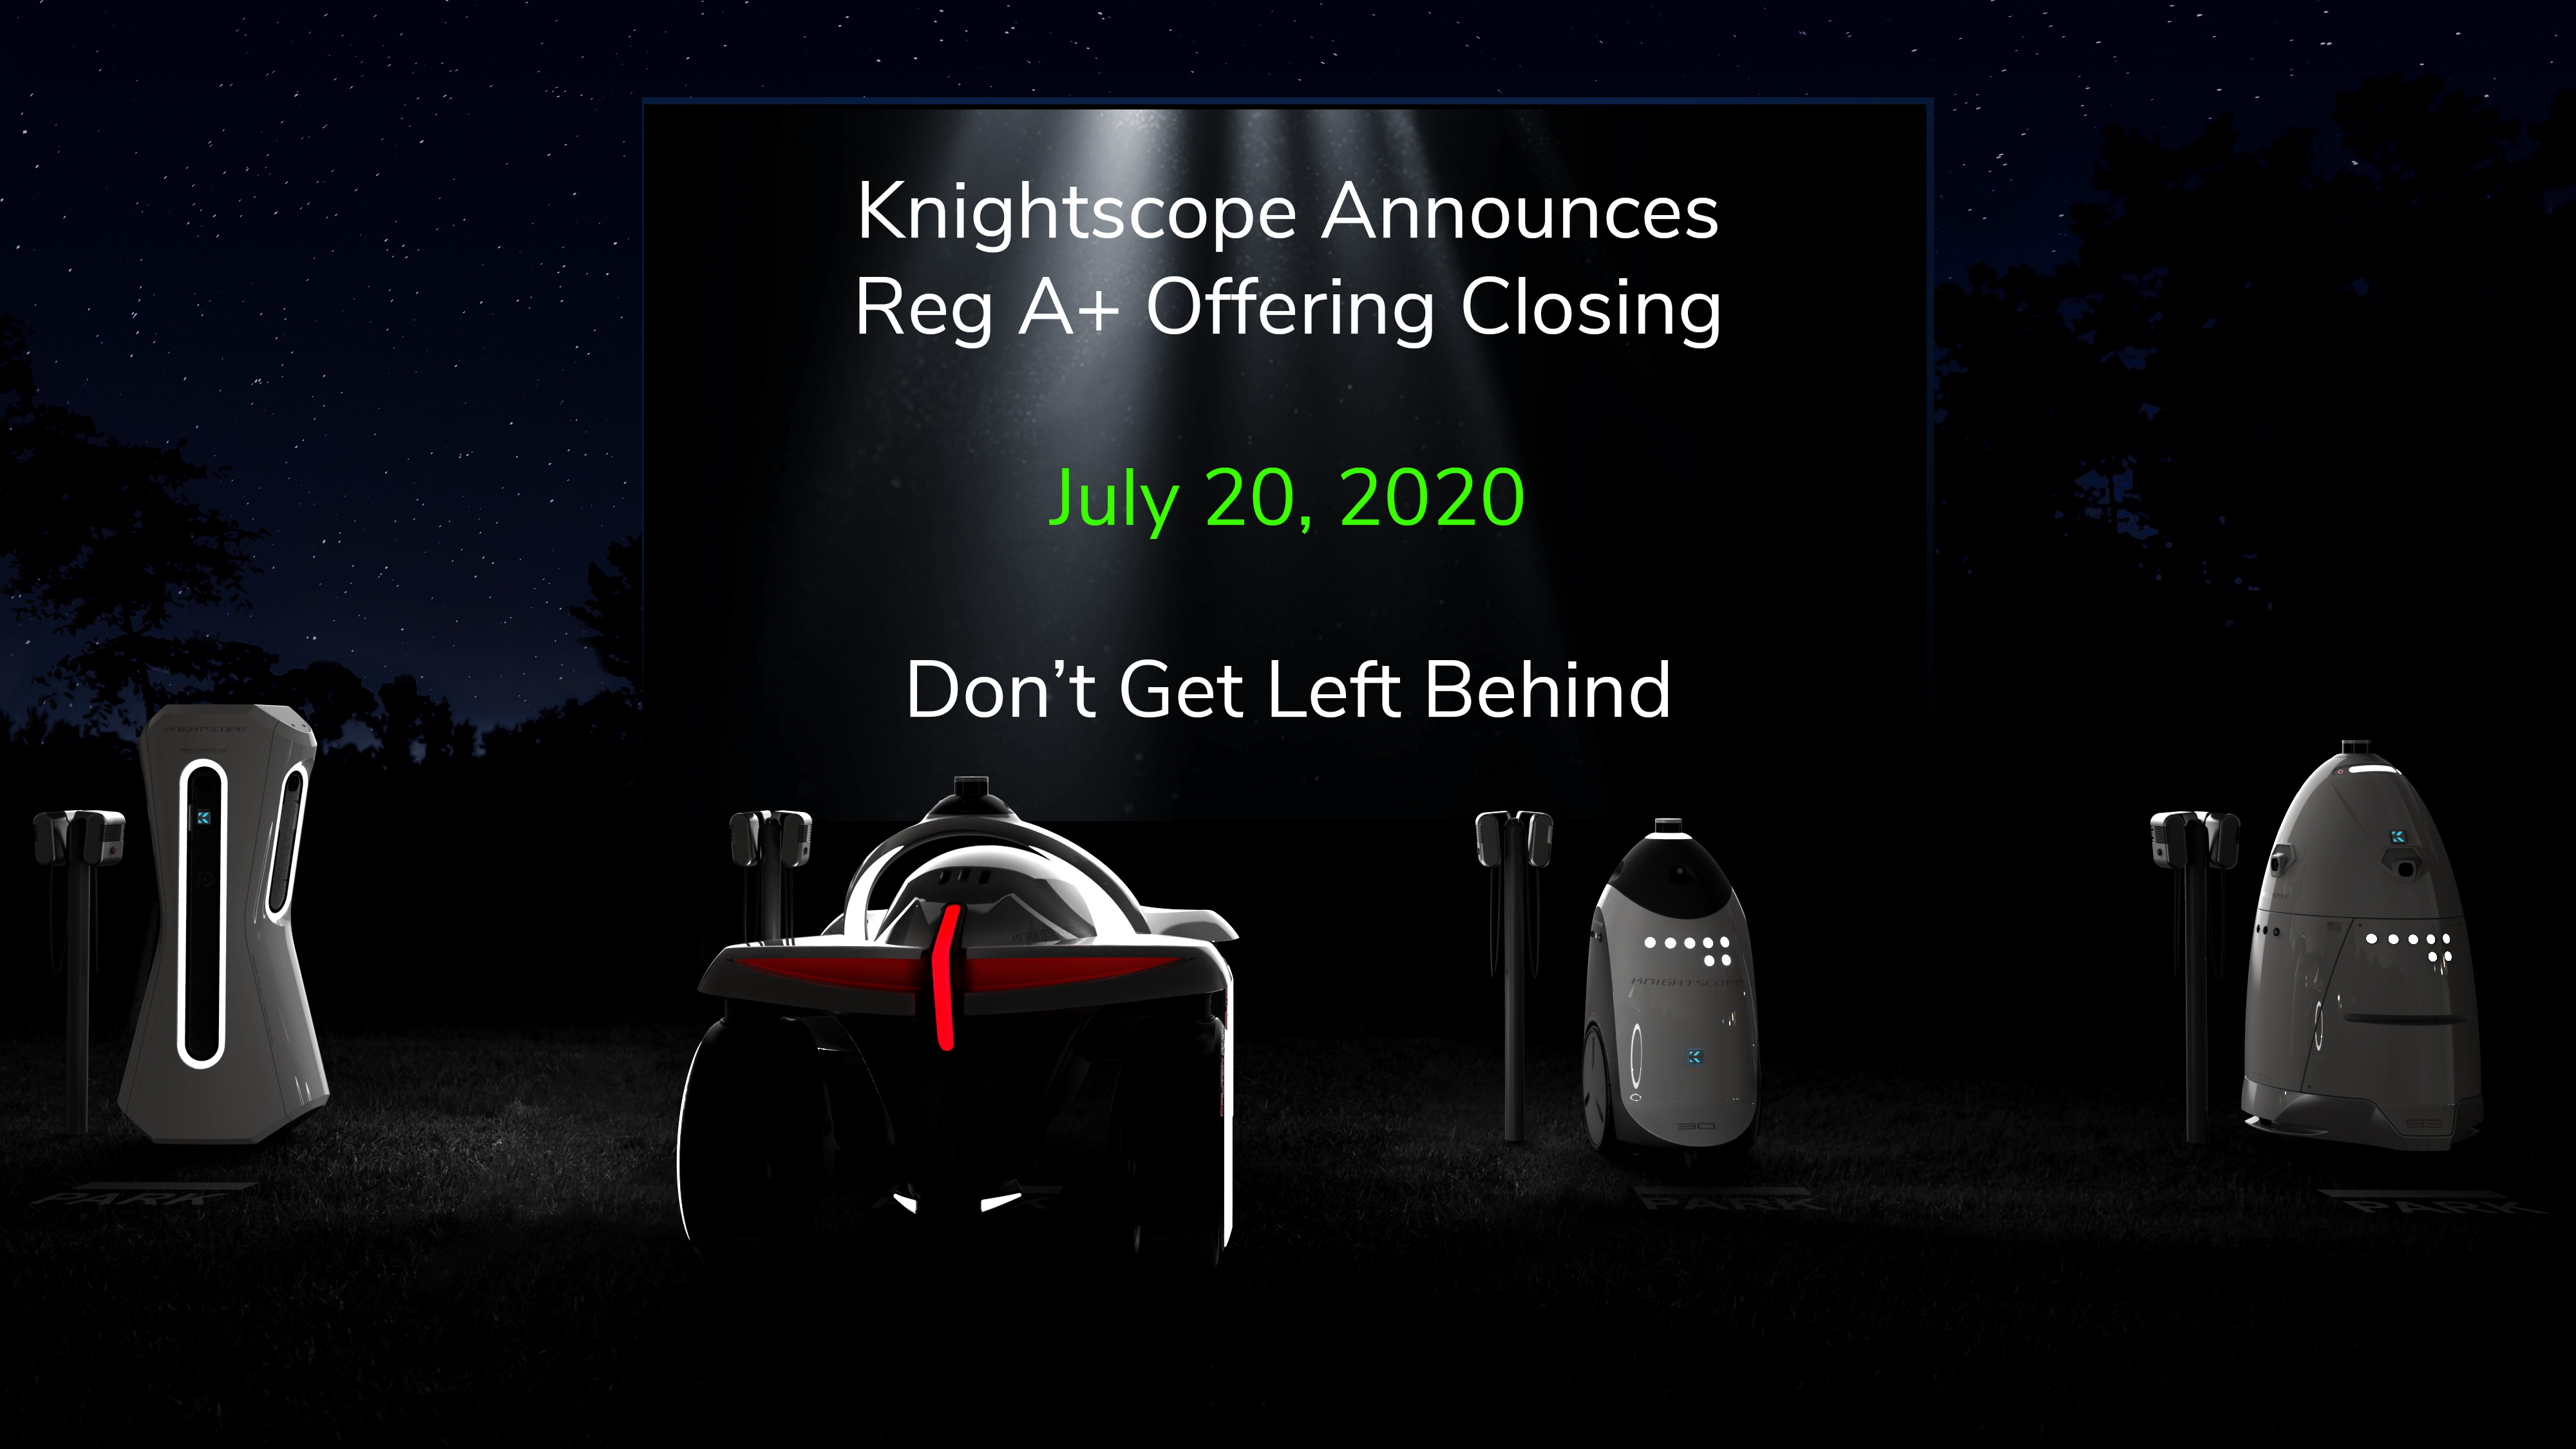 Knightscope Announces Closing Date For Regulation A Offering Business Wire